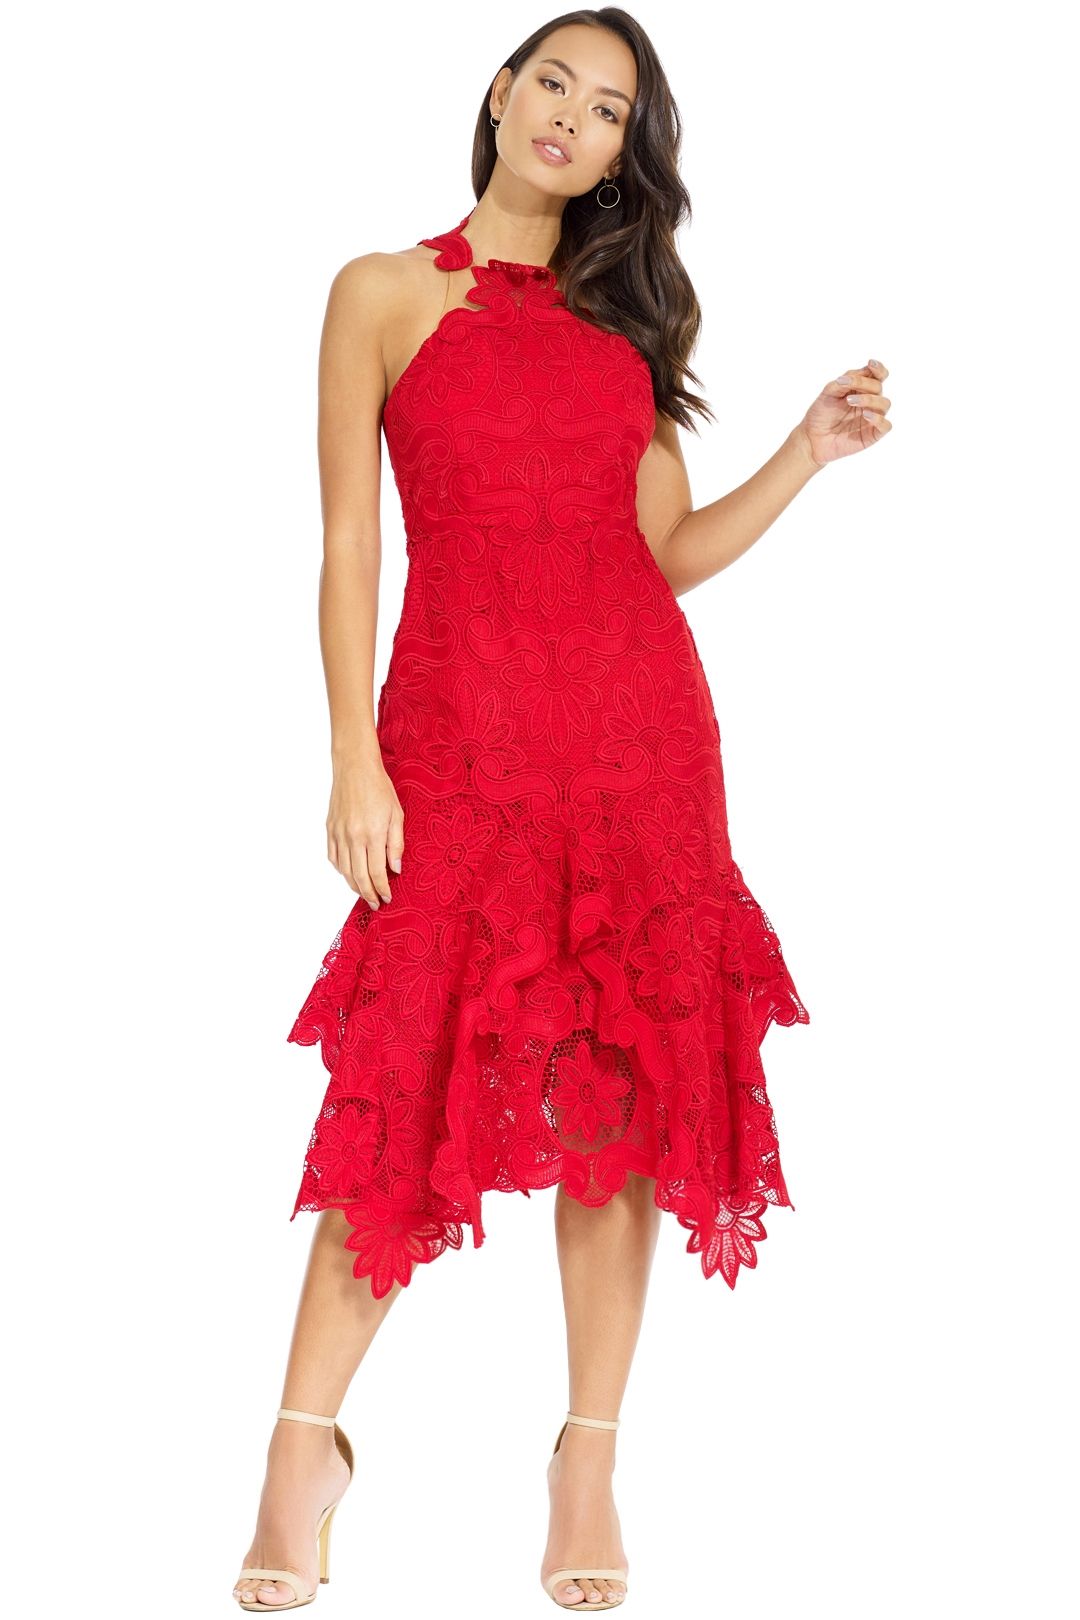 Thurley - Waterlily Midi Dress - Red Rose - Front